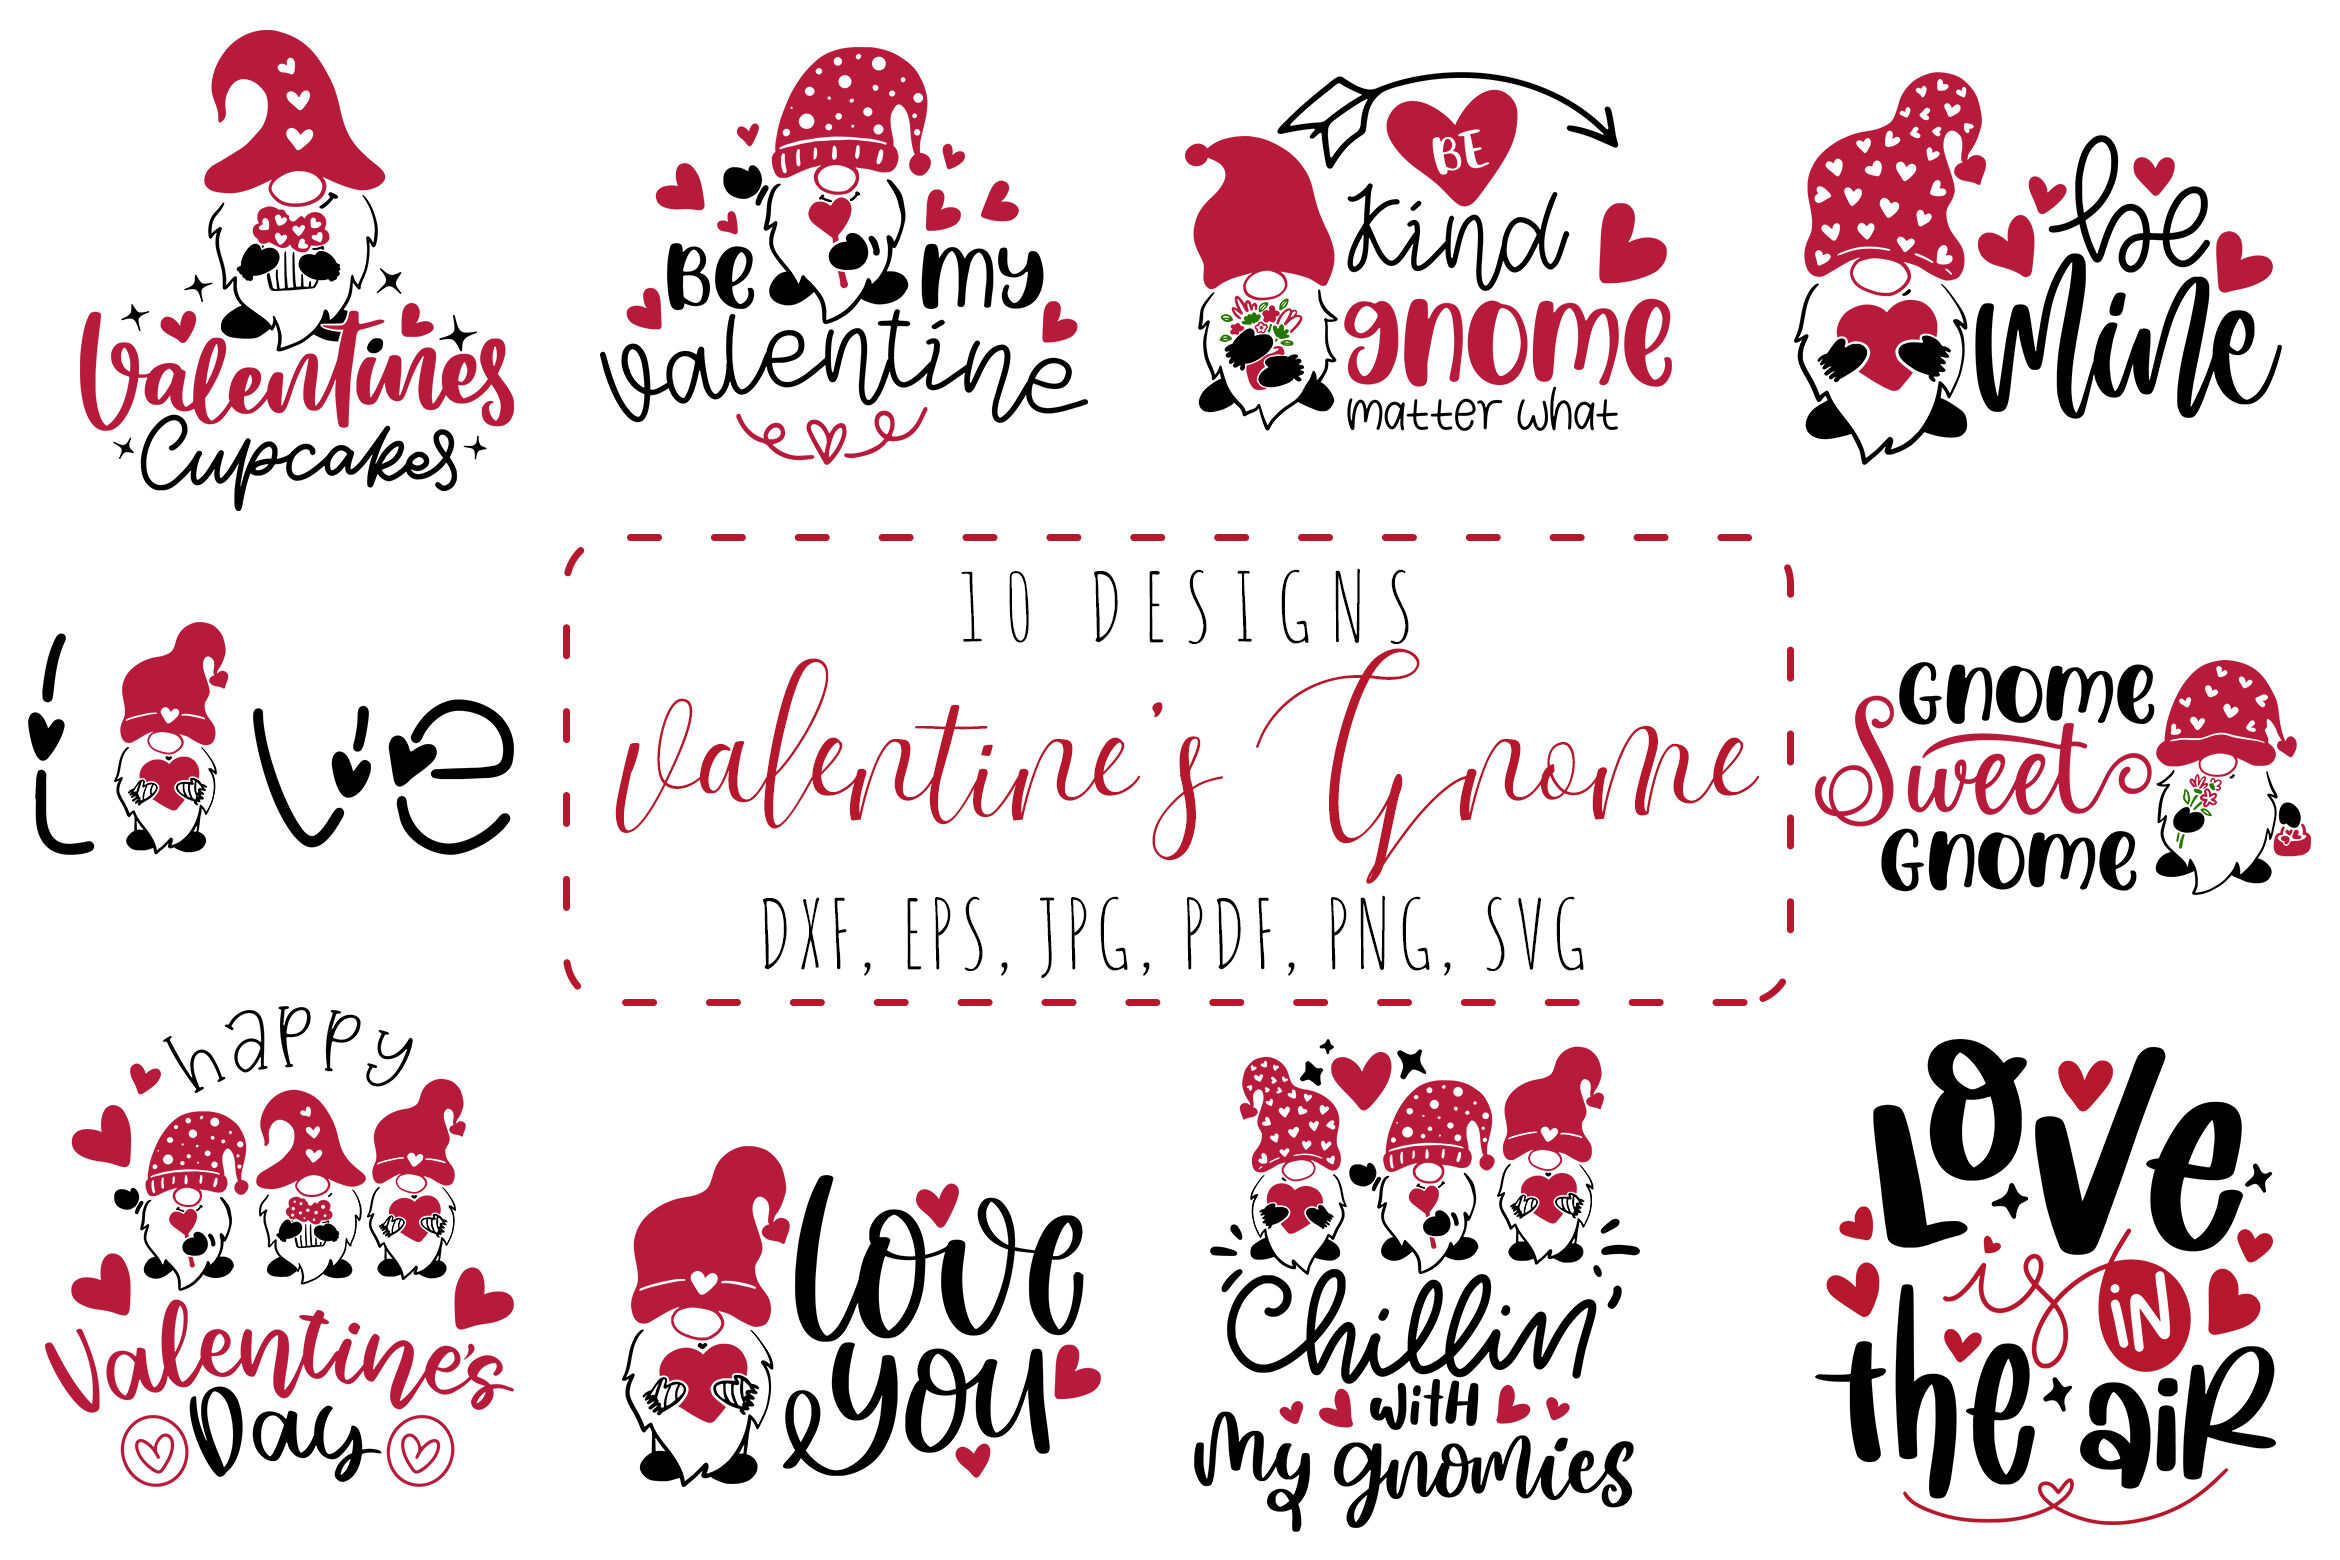 Red Heart Svg, Red Hand Drawn Heart Svg, Valentine's Day Svg, Love Svg. Cut  File Cricut, Png Pdf Eps, Vector, Stencil, Decal, Sticker. -  Sweden